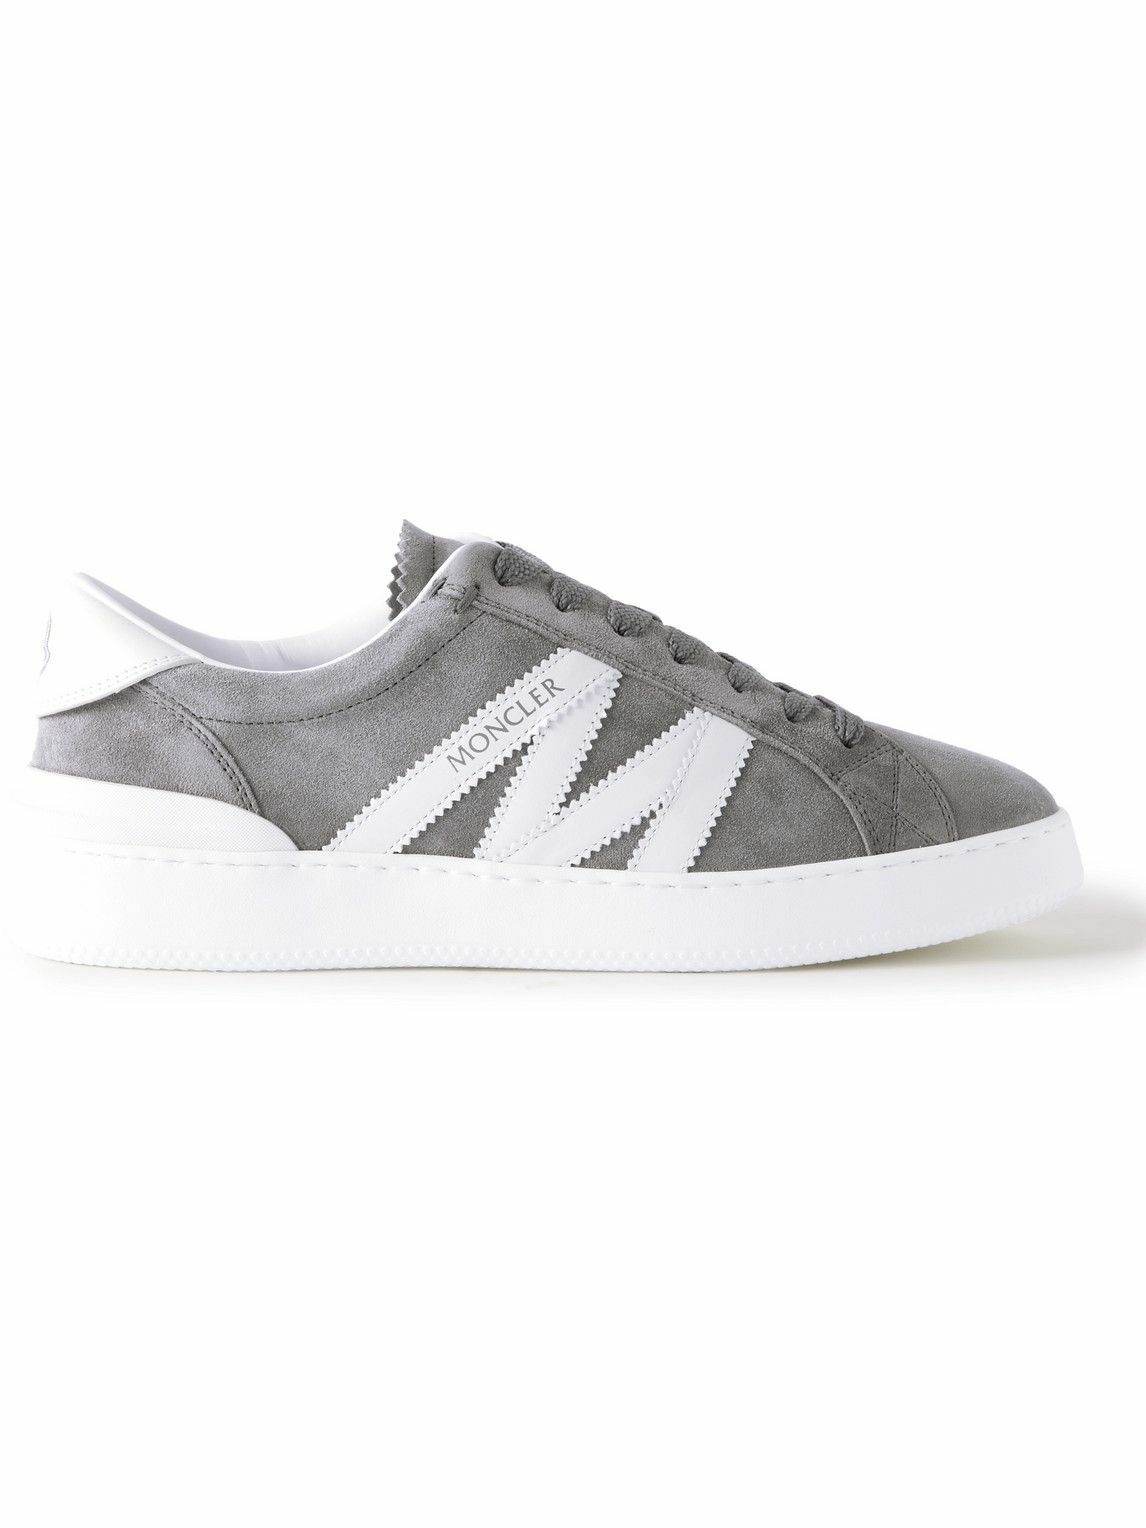 Photo: Moncler - Monaco Leather-Trimmed Suede Sneakers - Gray